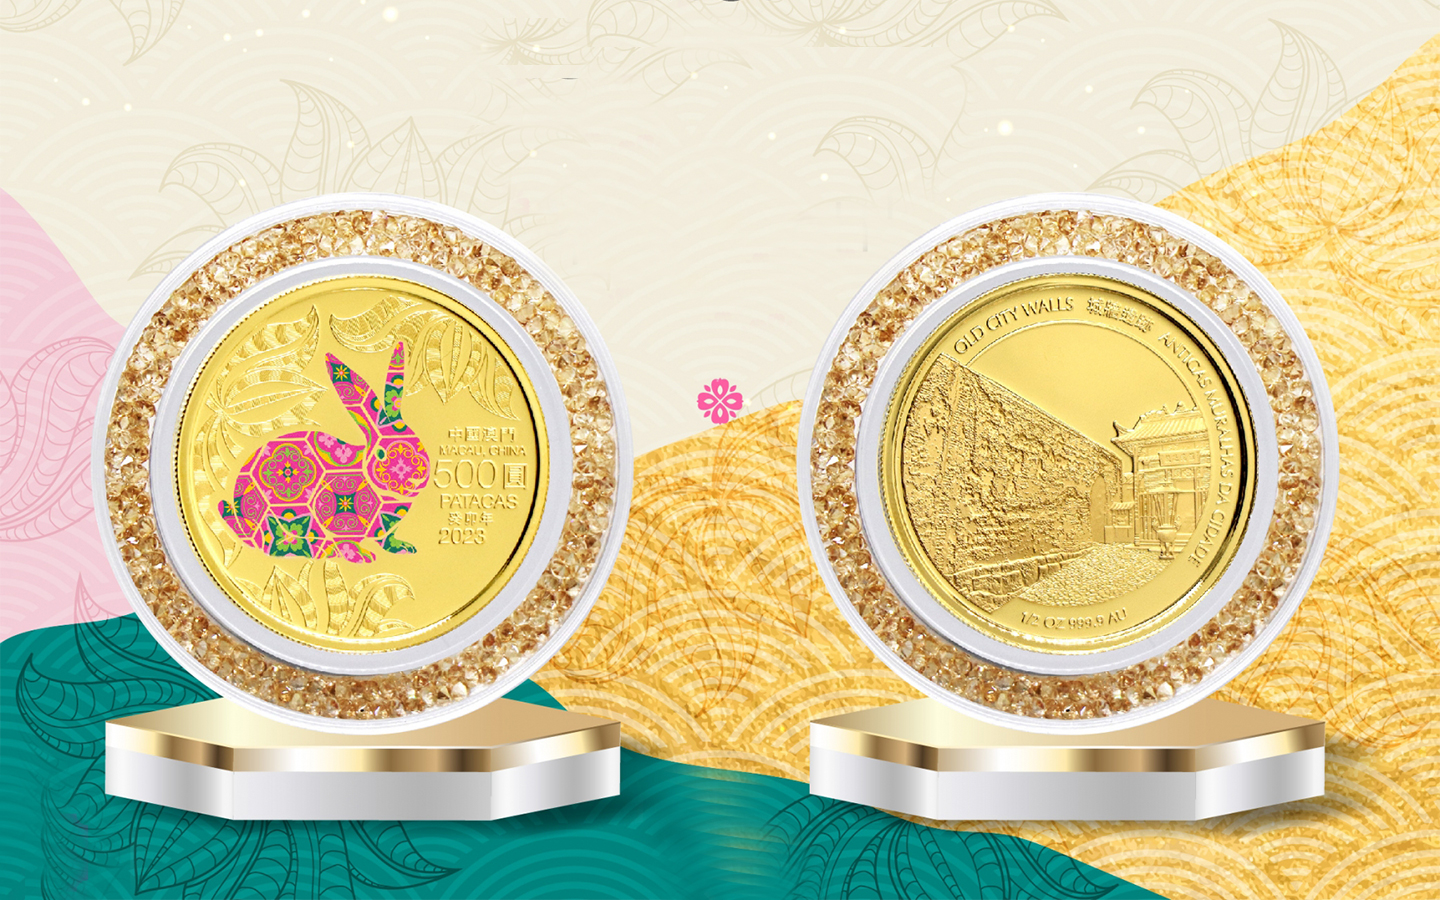 Year of the Rabbit commemorative coins go on sale today